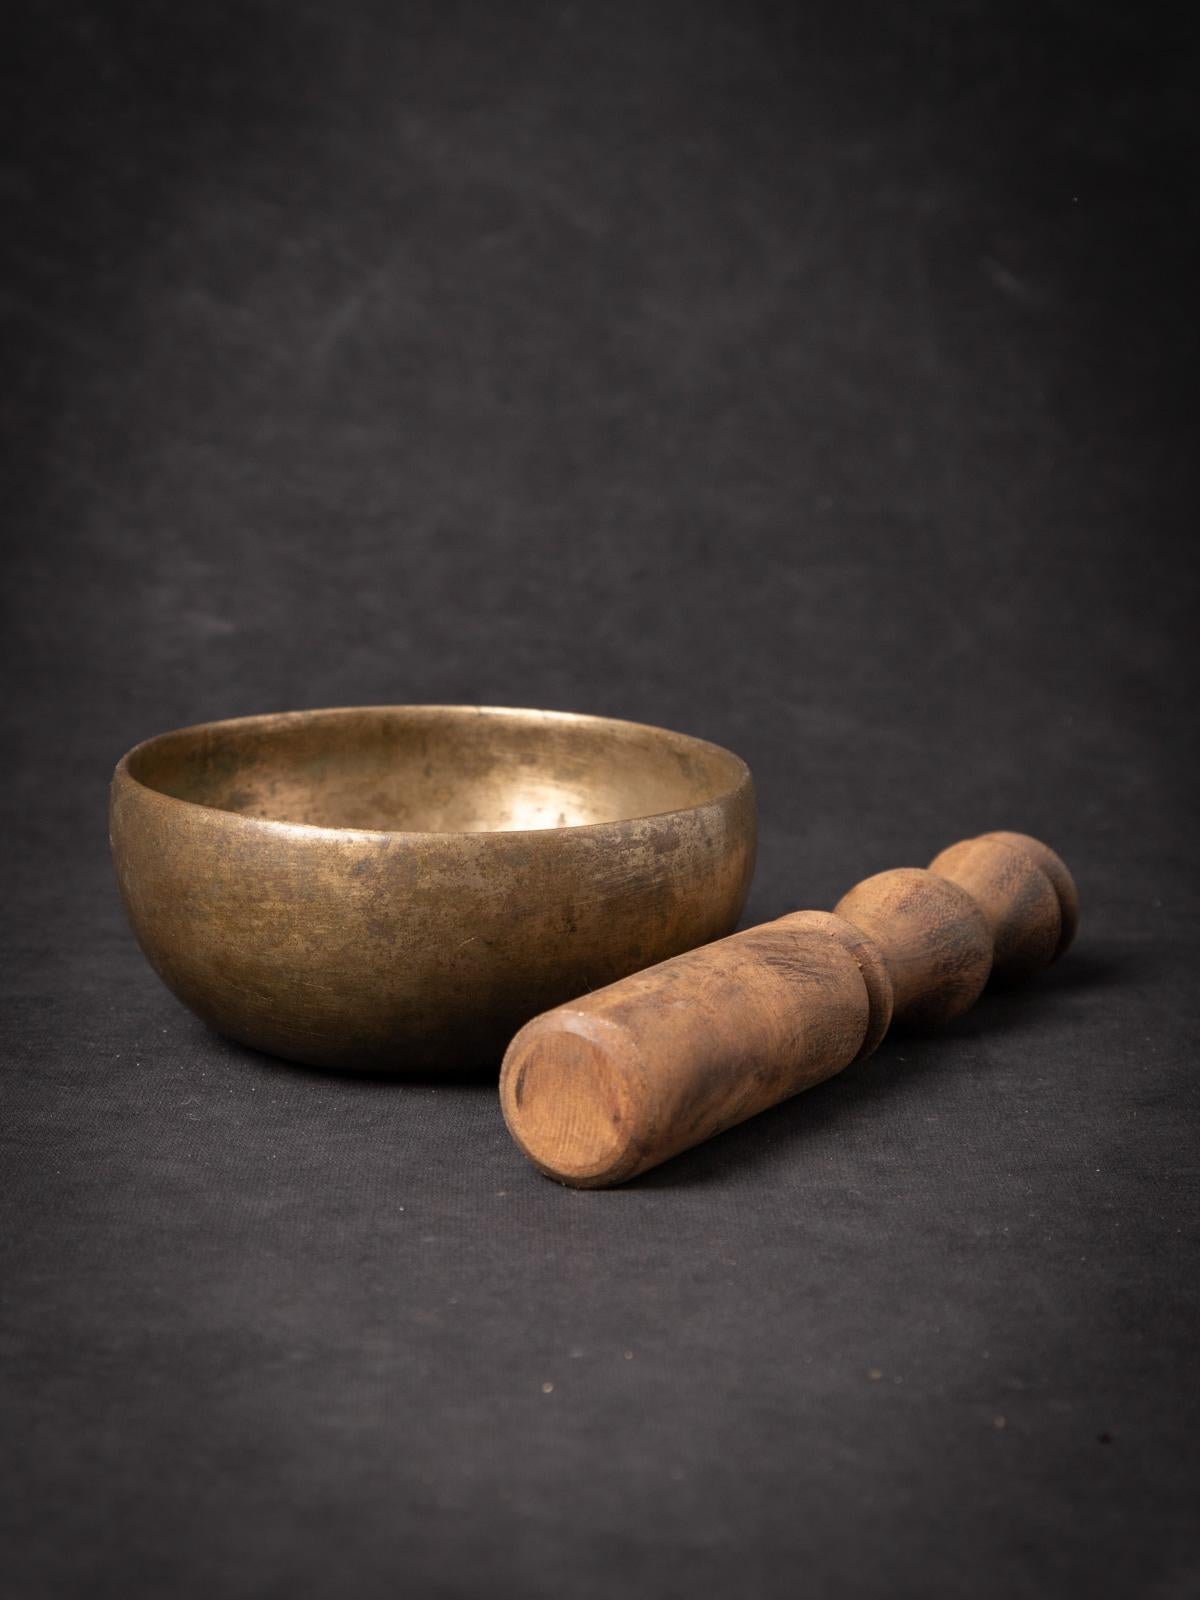 The antique bronze Nepali Singing Bowl is a fascinating and historically significant artifact originating from Nepal. Crafted from bronze, this singing bowl stands at 5.4 cm in height and has a diameter of 12.5 cm. Dating back to the early 20th